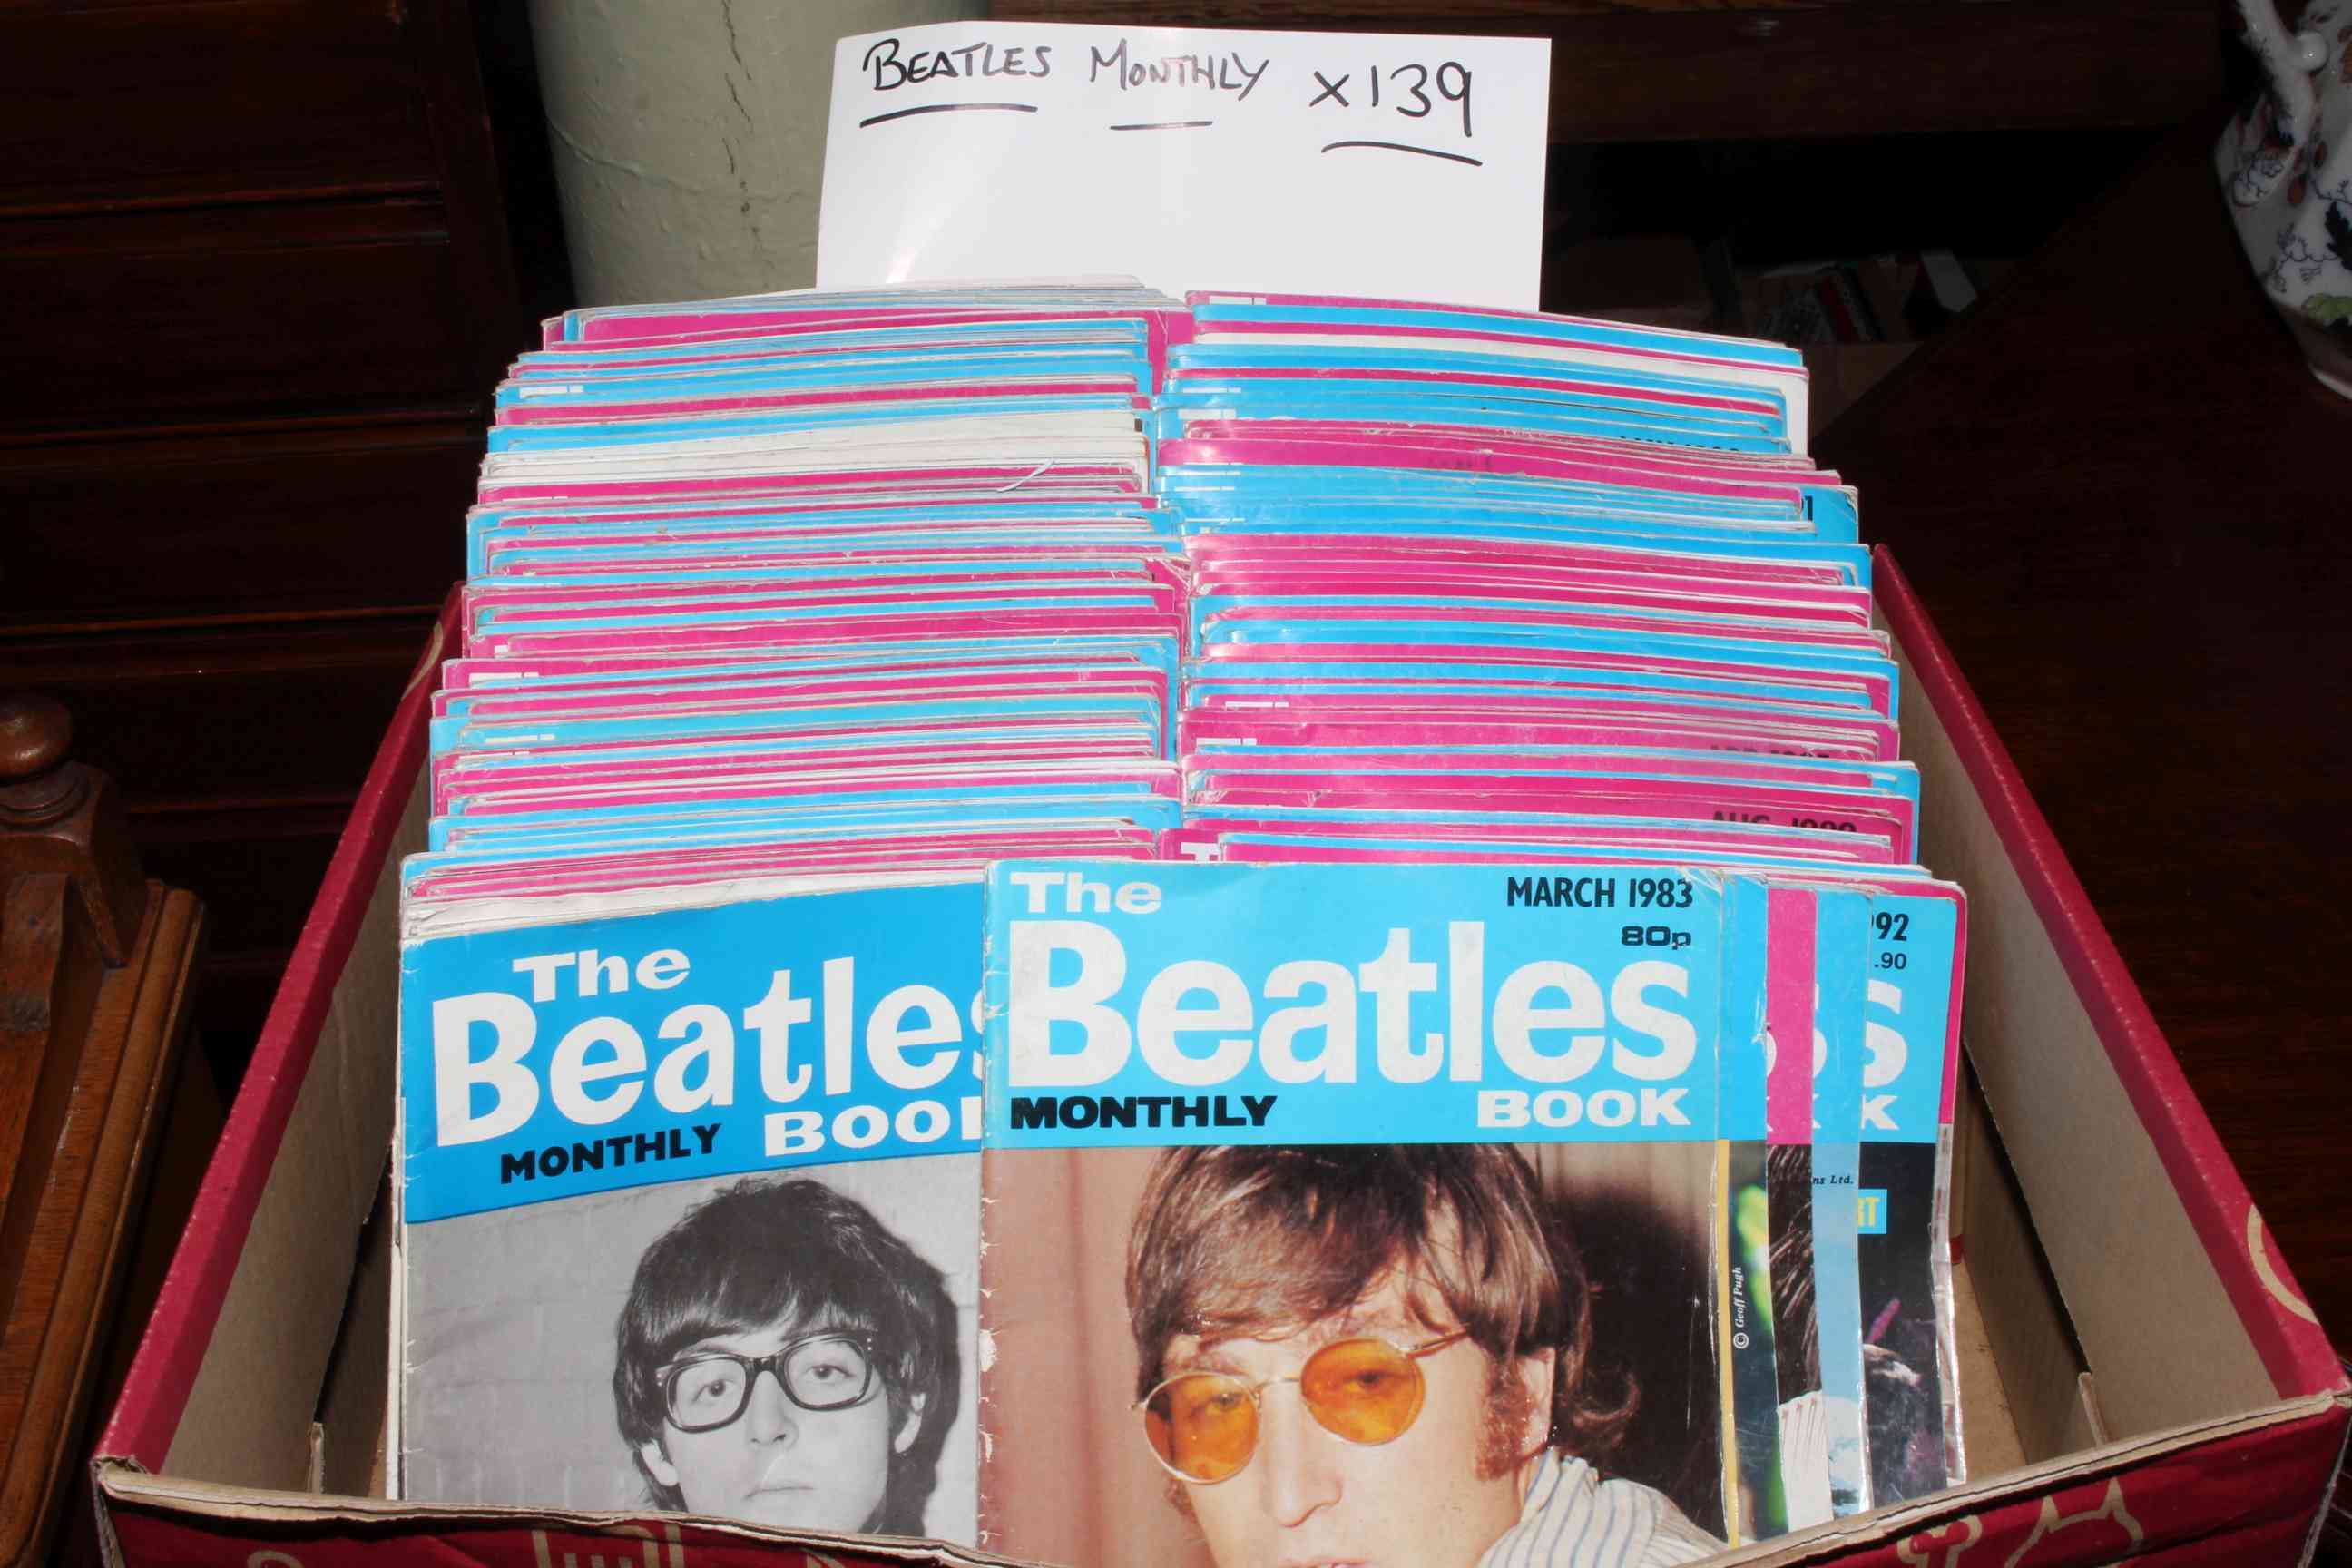 The Beatles Monthly Book, approximately 130 issues dating 1980's to 2000's.